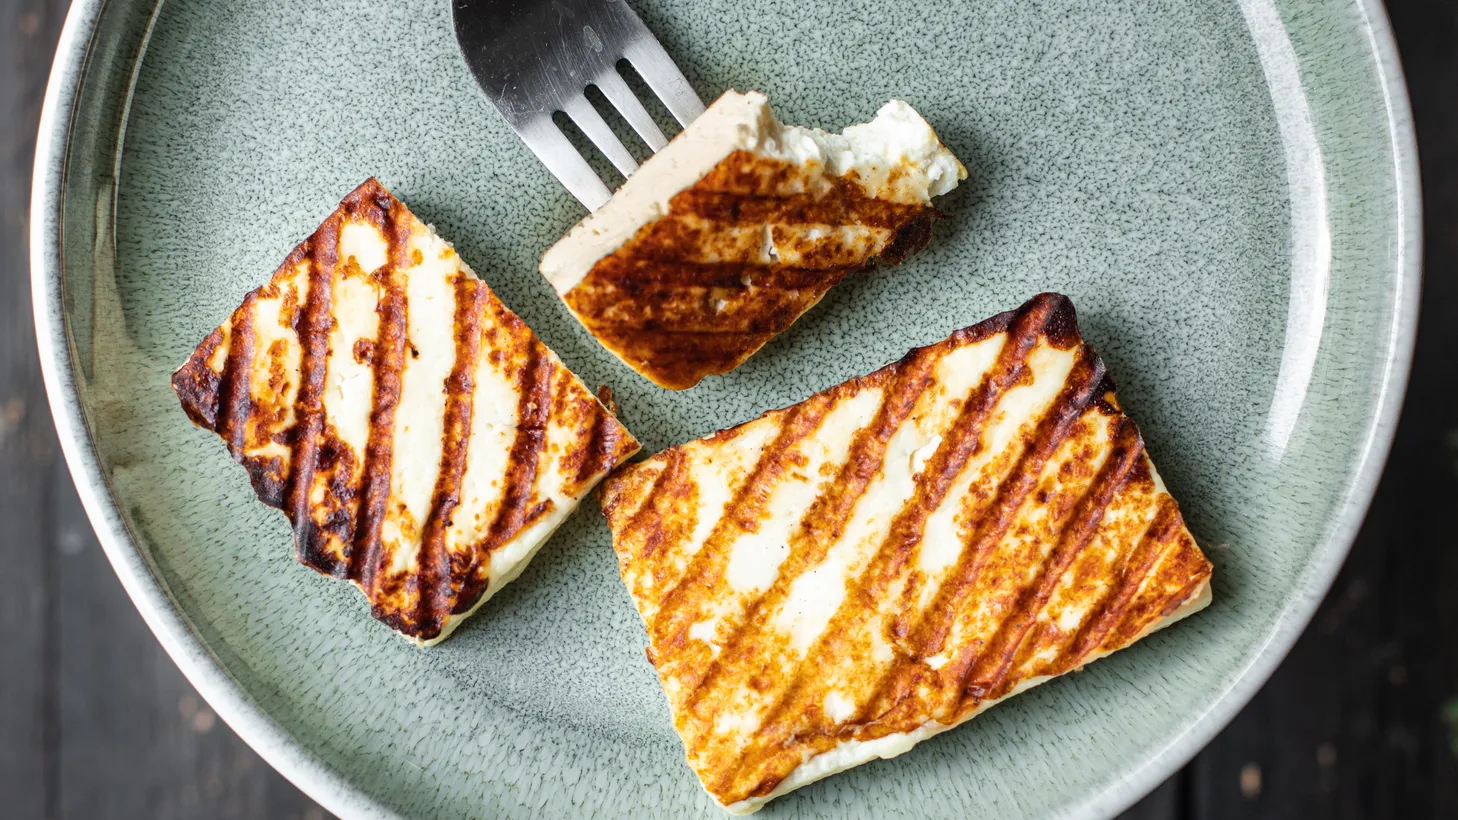 The United Kingdom is the largest importer of halloumi, a Cyprian cheese, but British cheesemakers discovered they have to find another name for the same product on home turf.